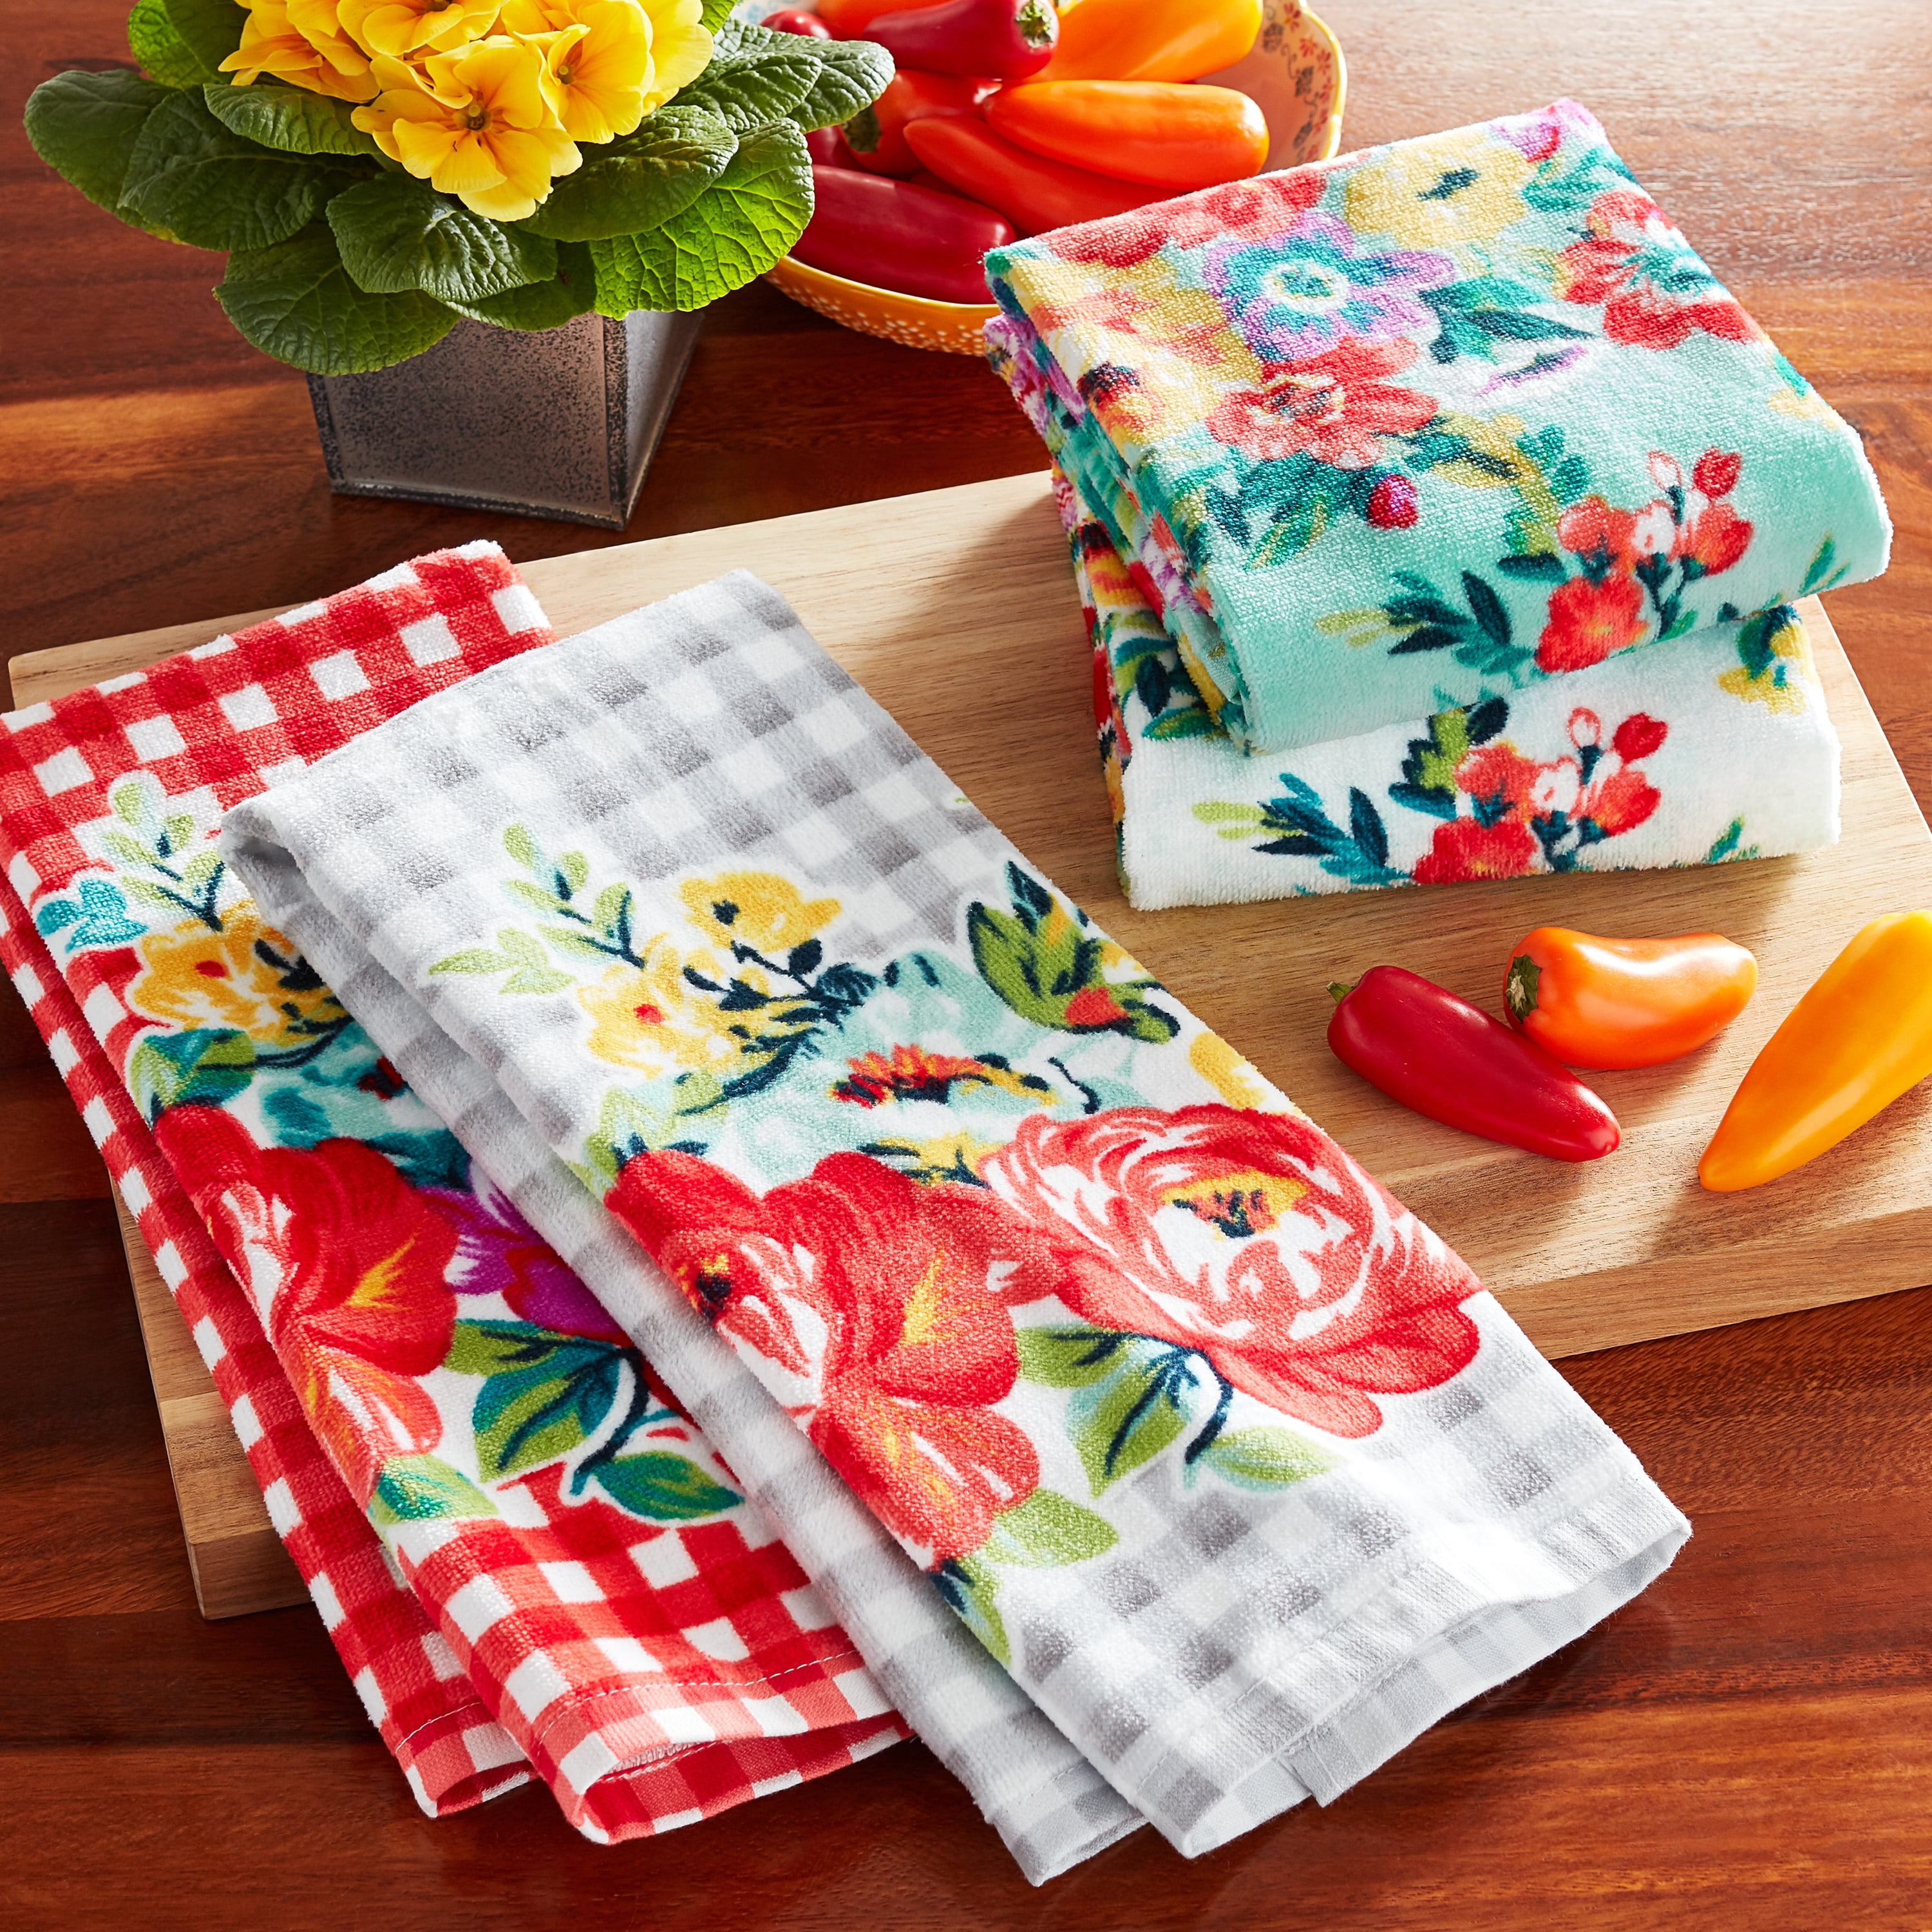 The Pioneer Woman Sweet Rose Kitchen Towel, Oven Mitt, and Pot